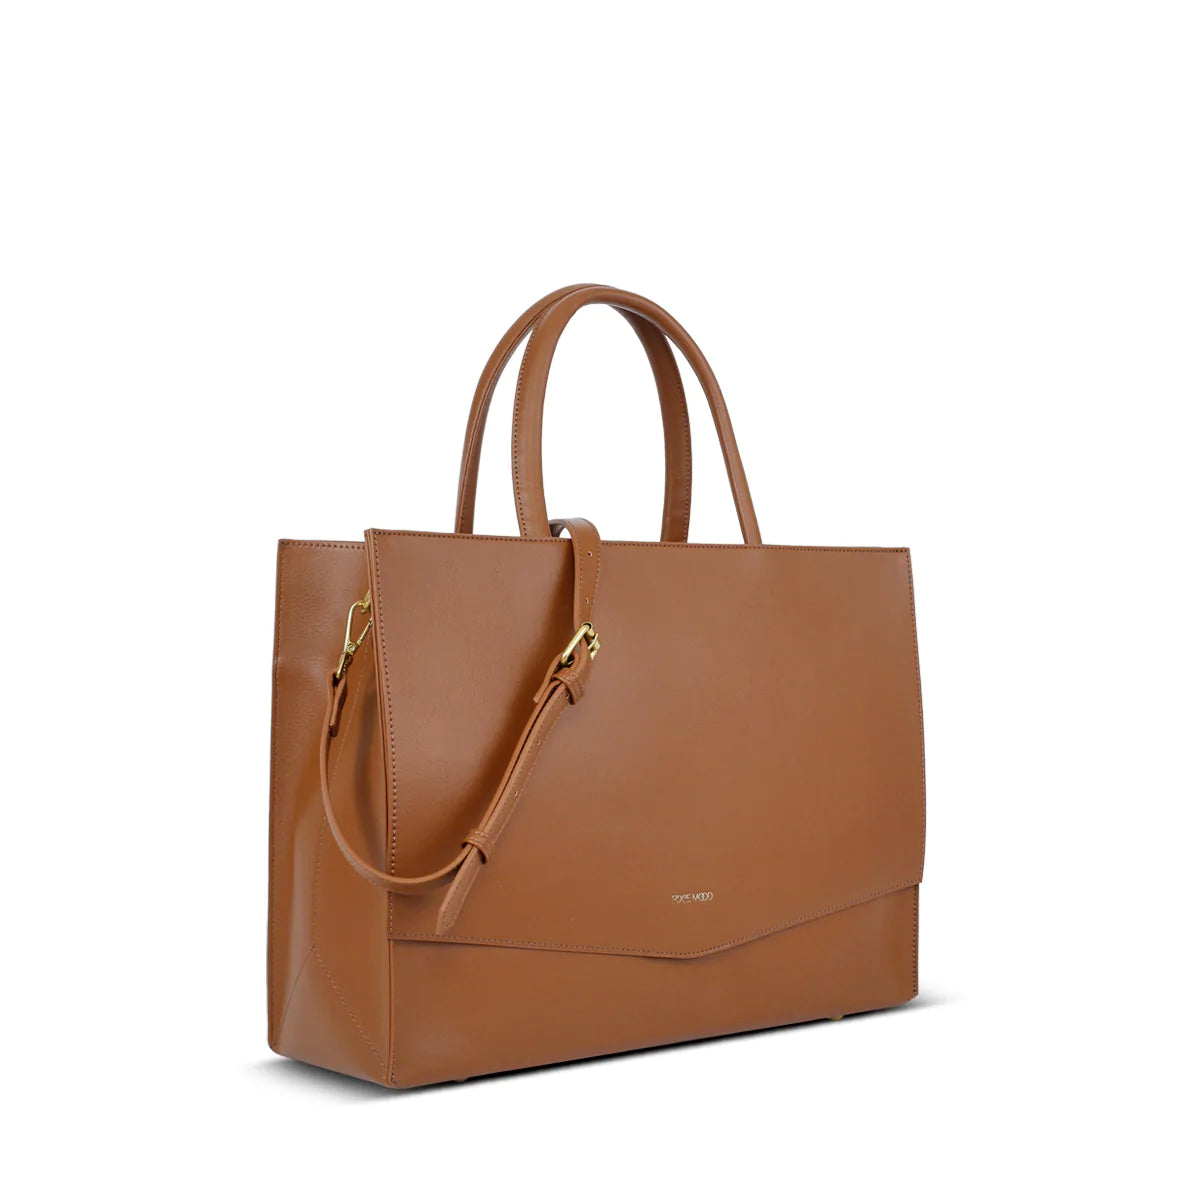 CAITLIN TOTE